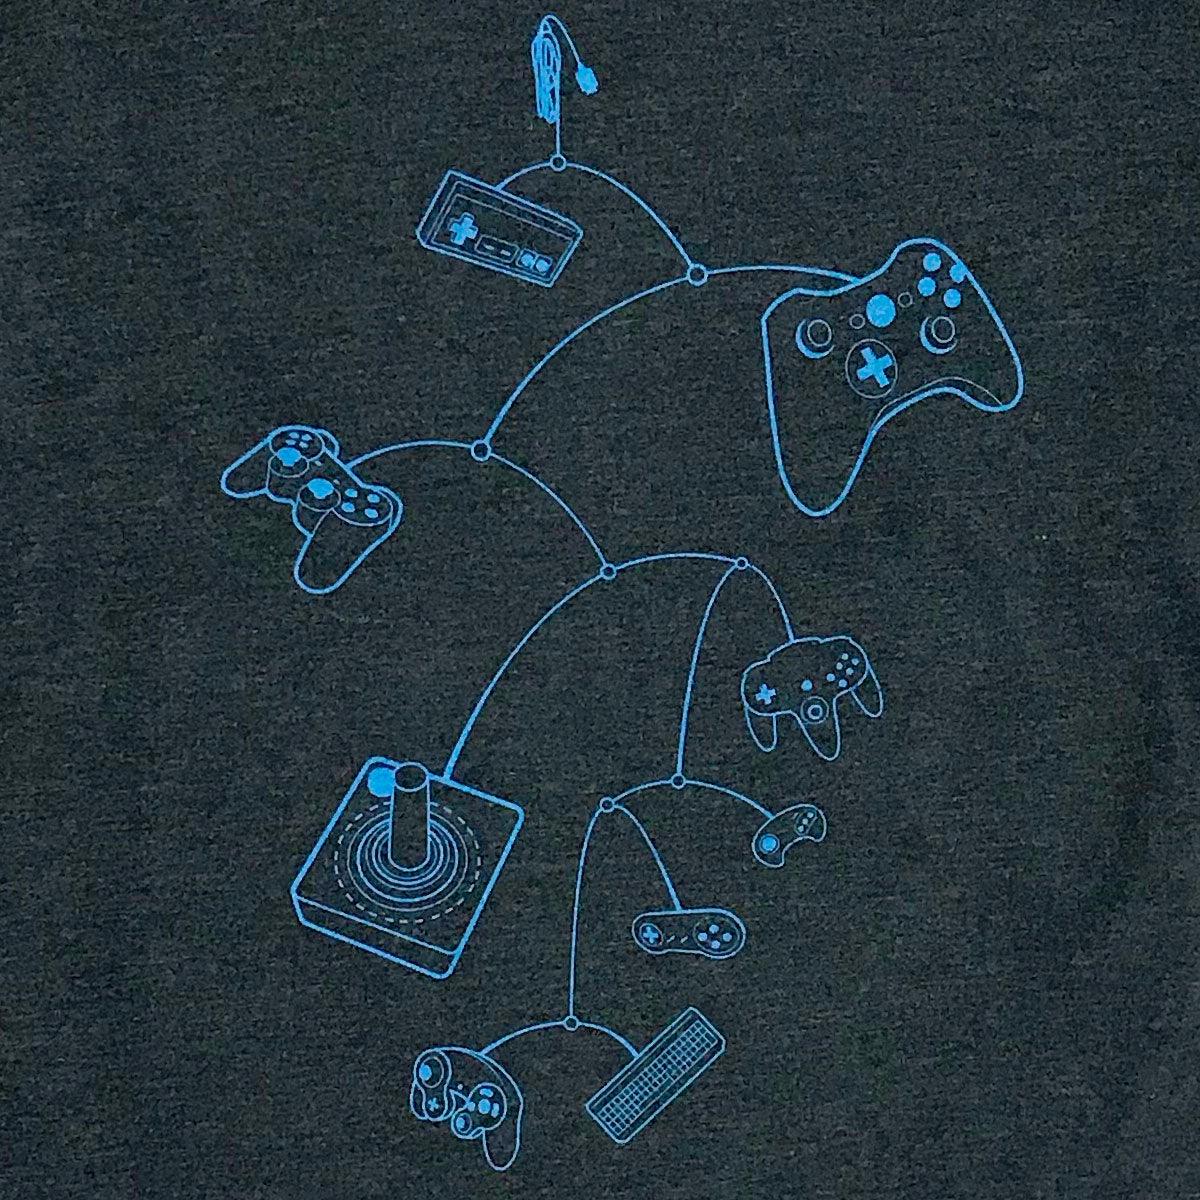 Mobile Controls T-Shirt-STORY SPARK